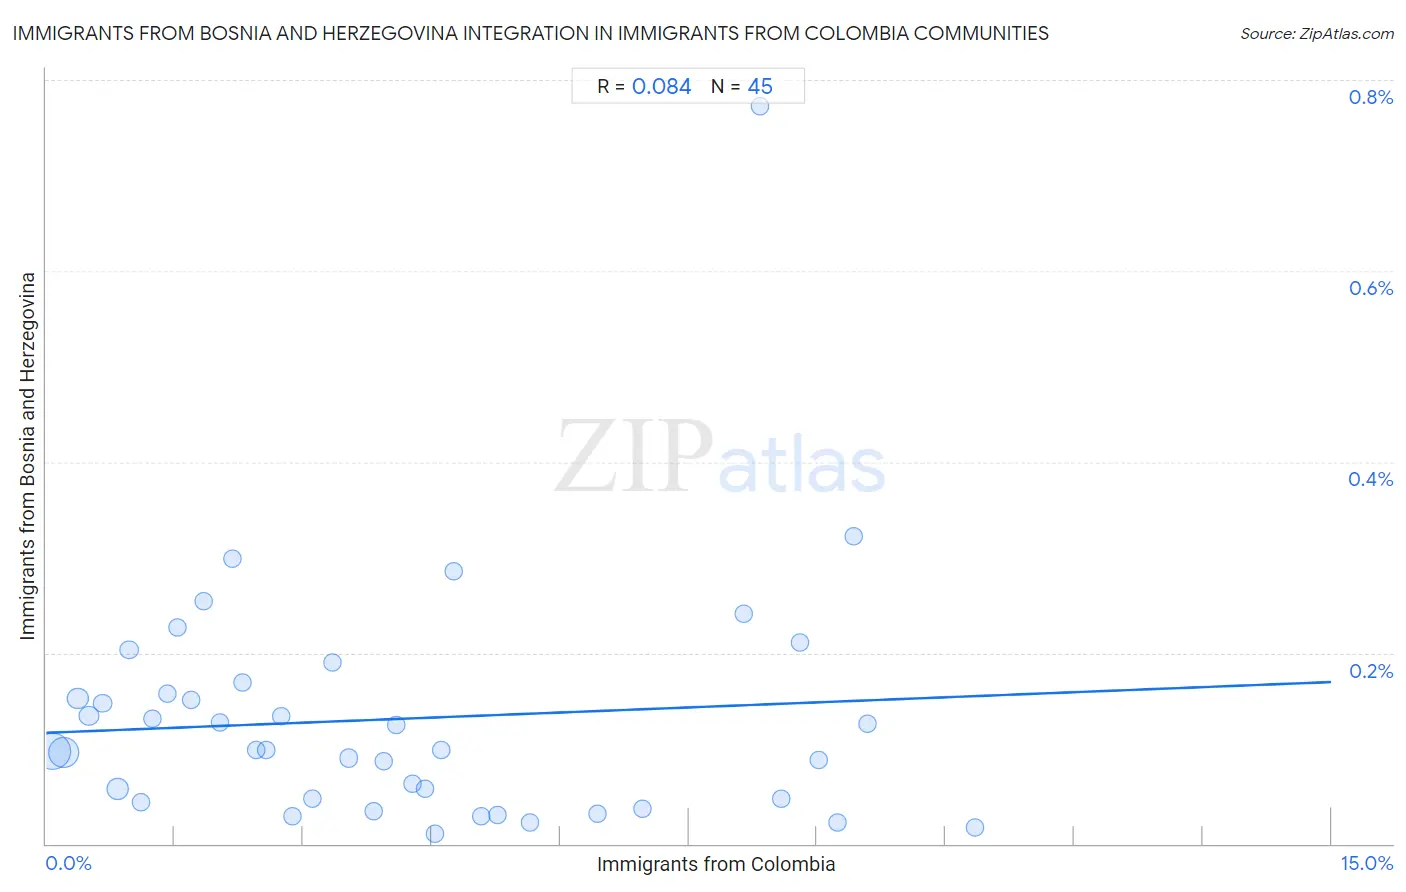 Immigrants from Colombia Integration in Immigrants from Bosnia and Herzegovina Communities